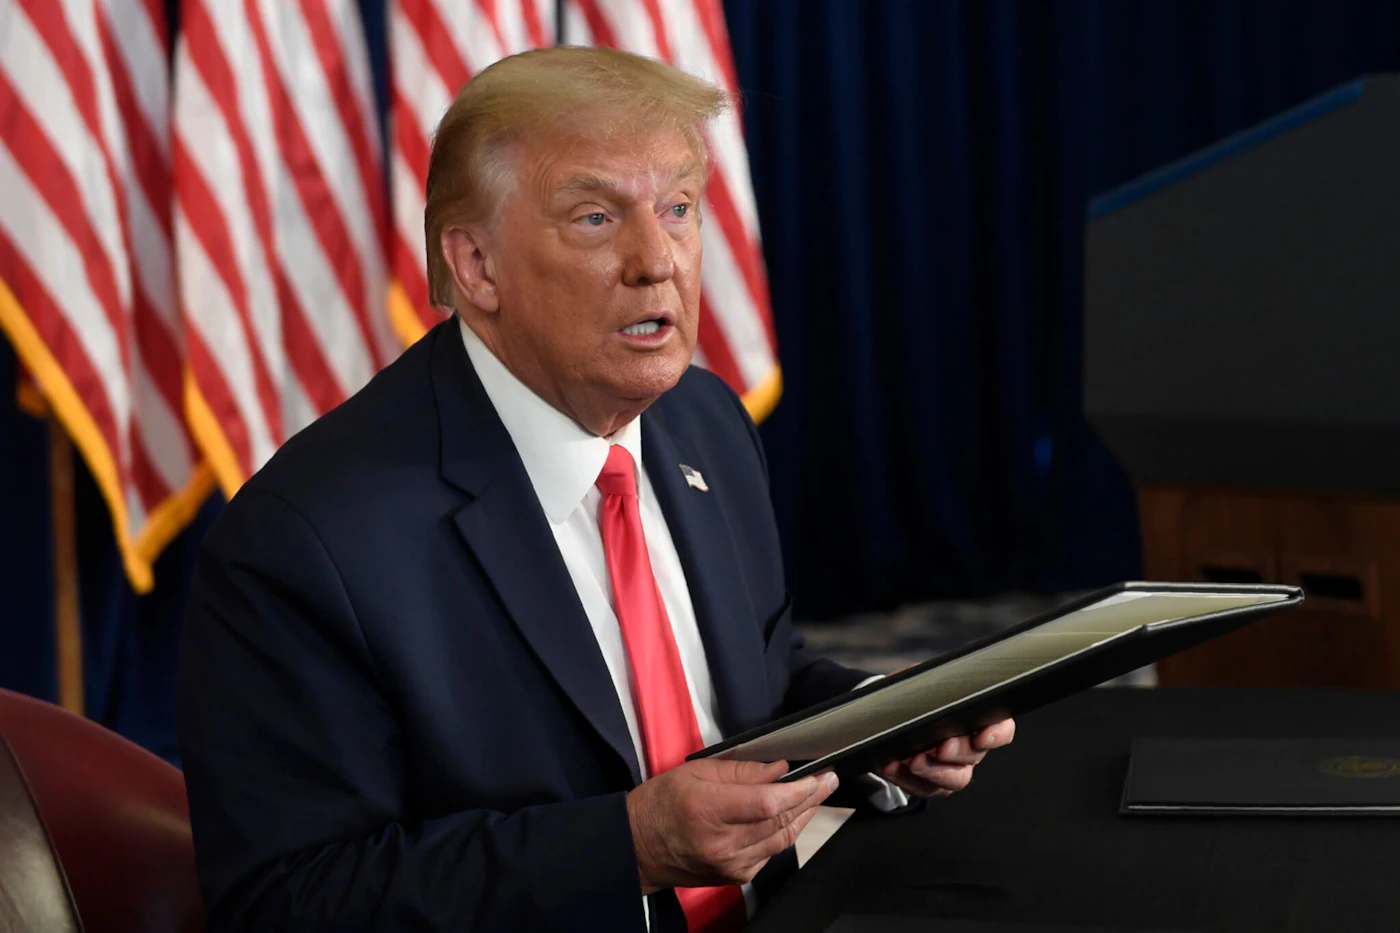 President Donald Trump prepares to sign four executive orders during a news conference at the Trump National Golf Club in Bedminster, N.J., in a Saturday, Aug. 8, 2020 file photo. (AP Photo/Susan Walsh, File)